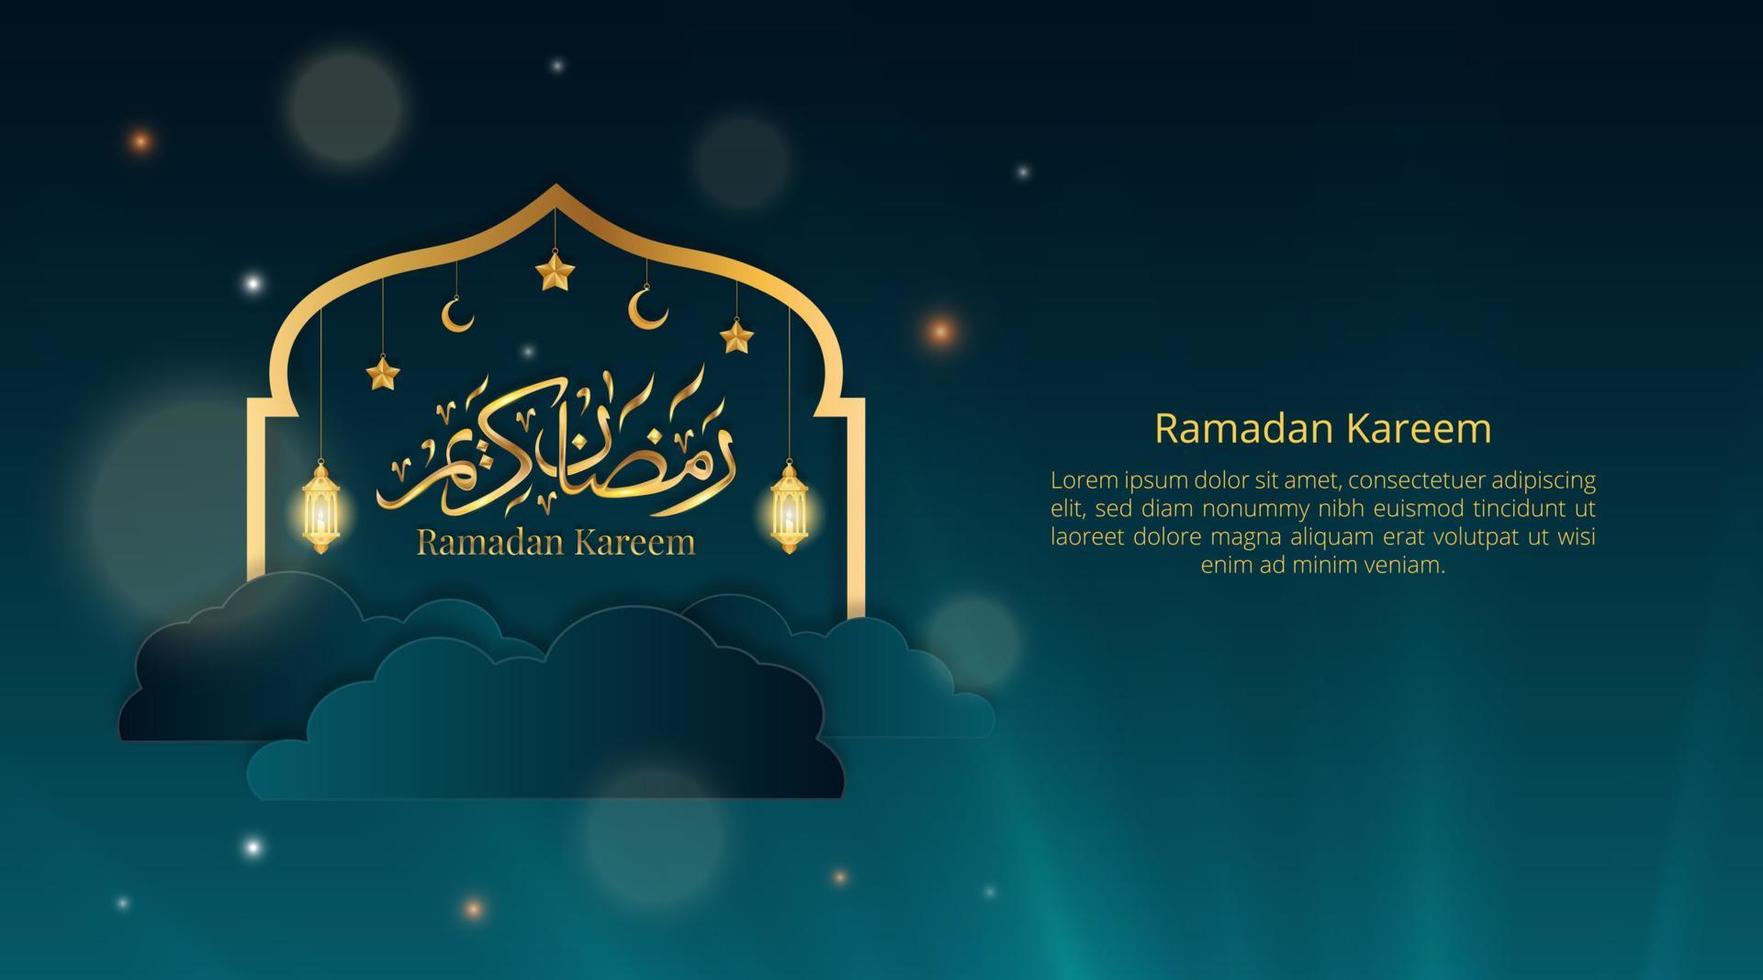 Ramadan Kareem background with cutting paper calligraphy and lantern vector